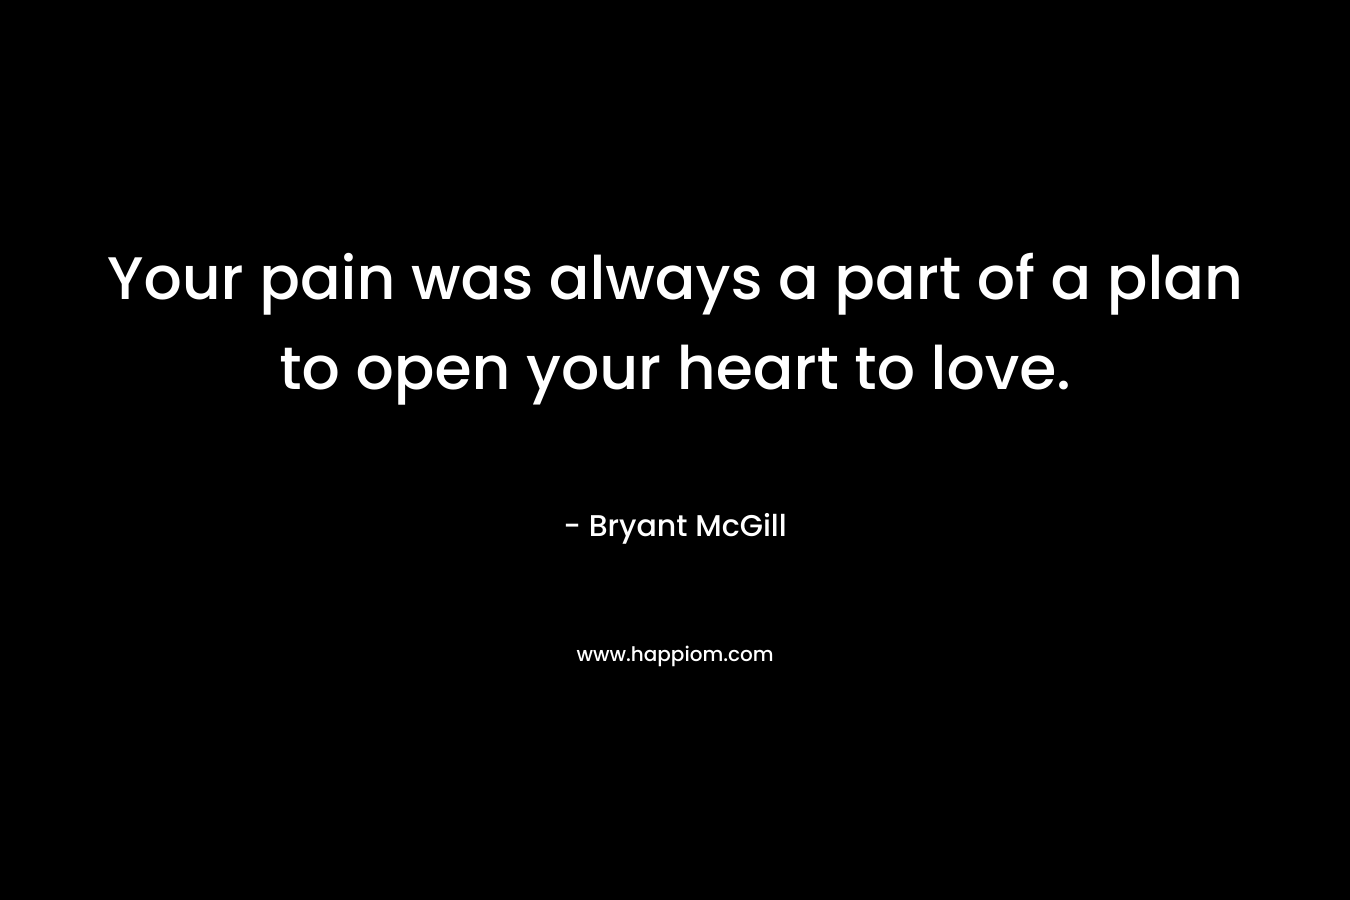 Your pain was always a part of a plan to open your heart to love.